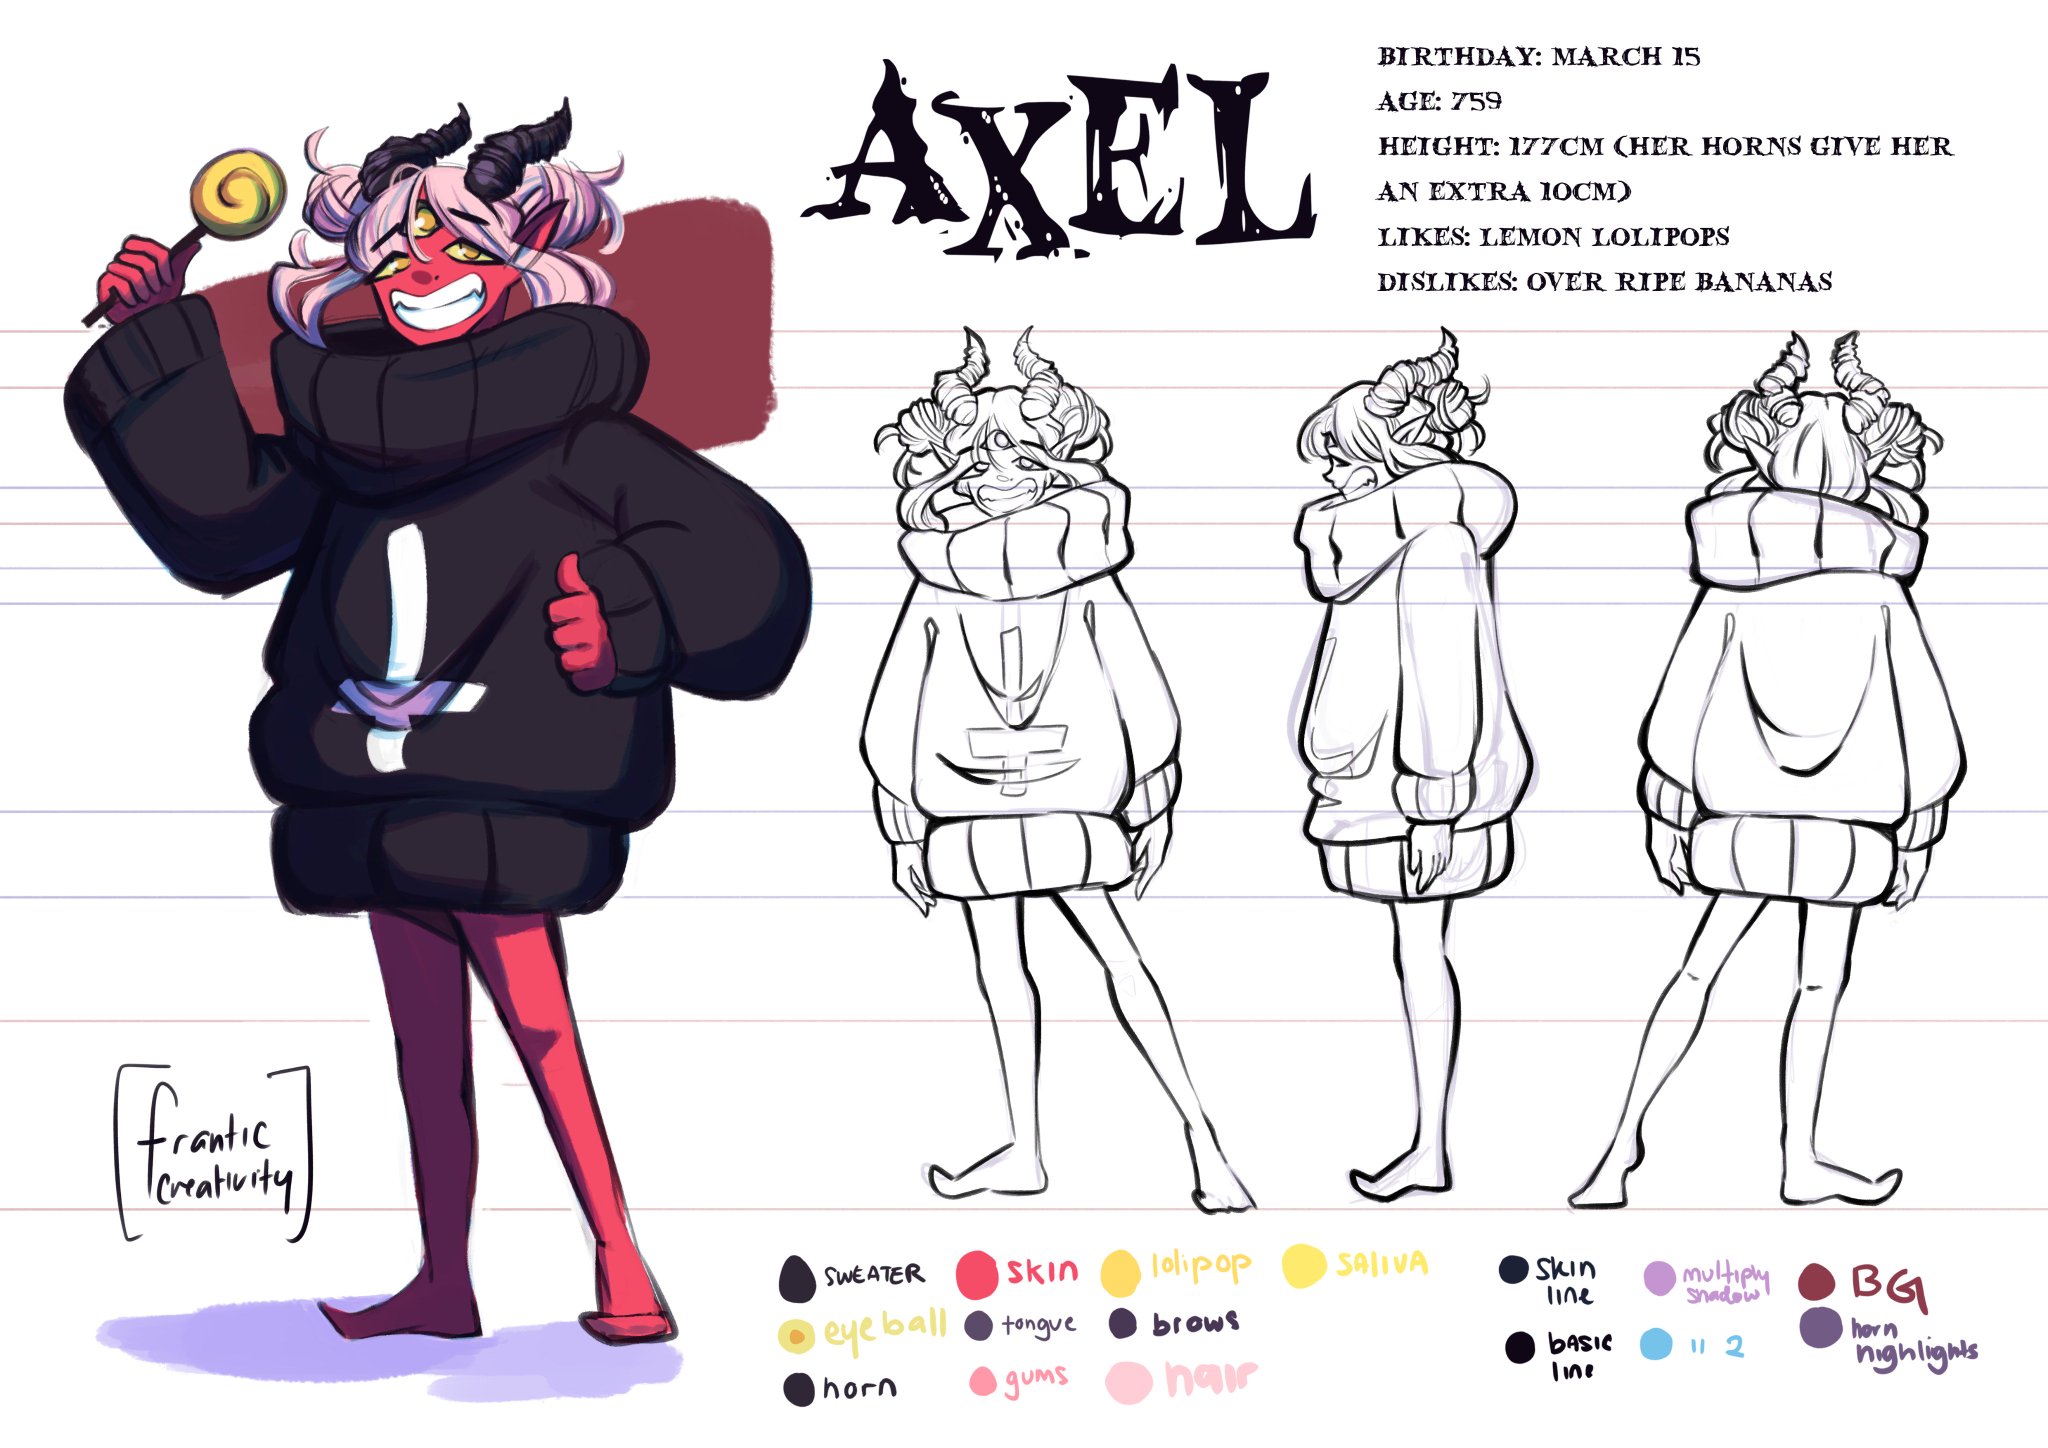 franticcreativity on Twitter: "finished character sheet for my OC Axel